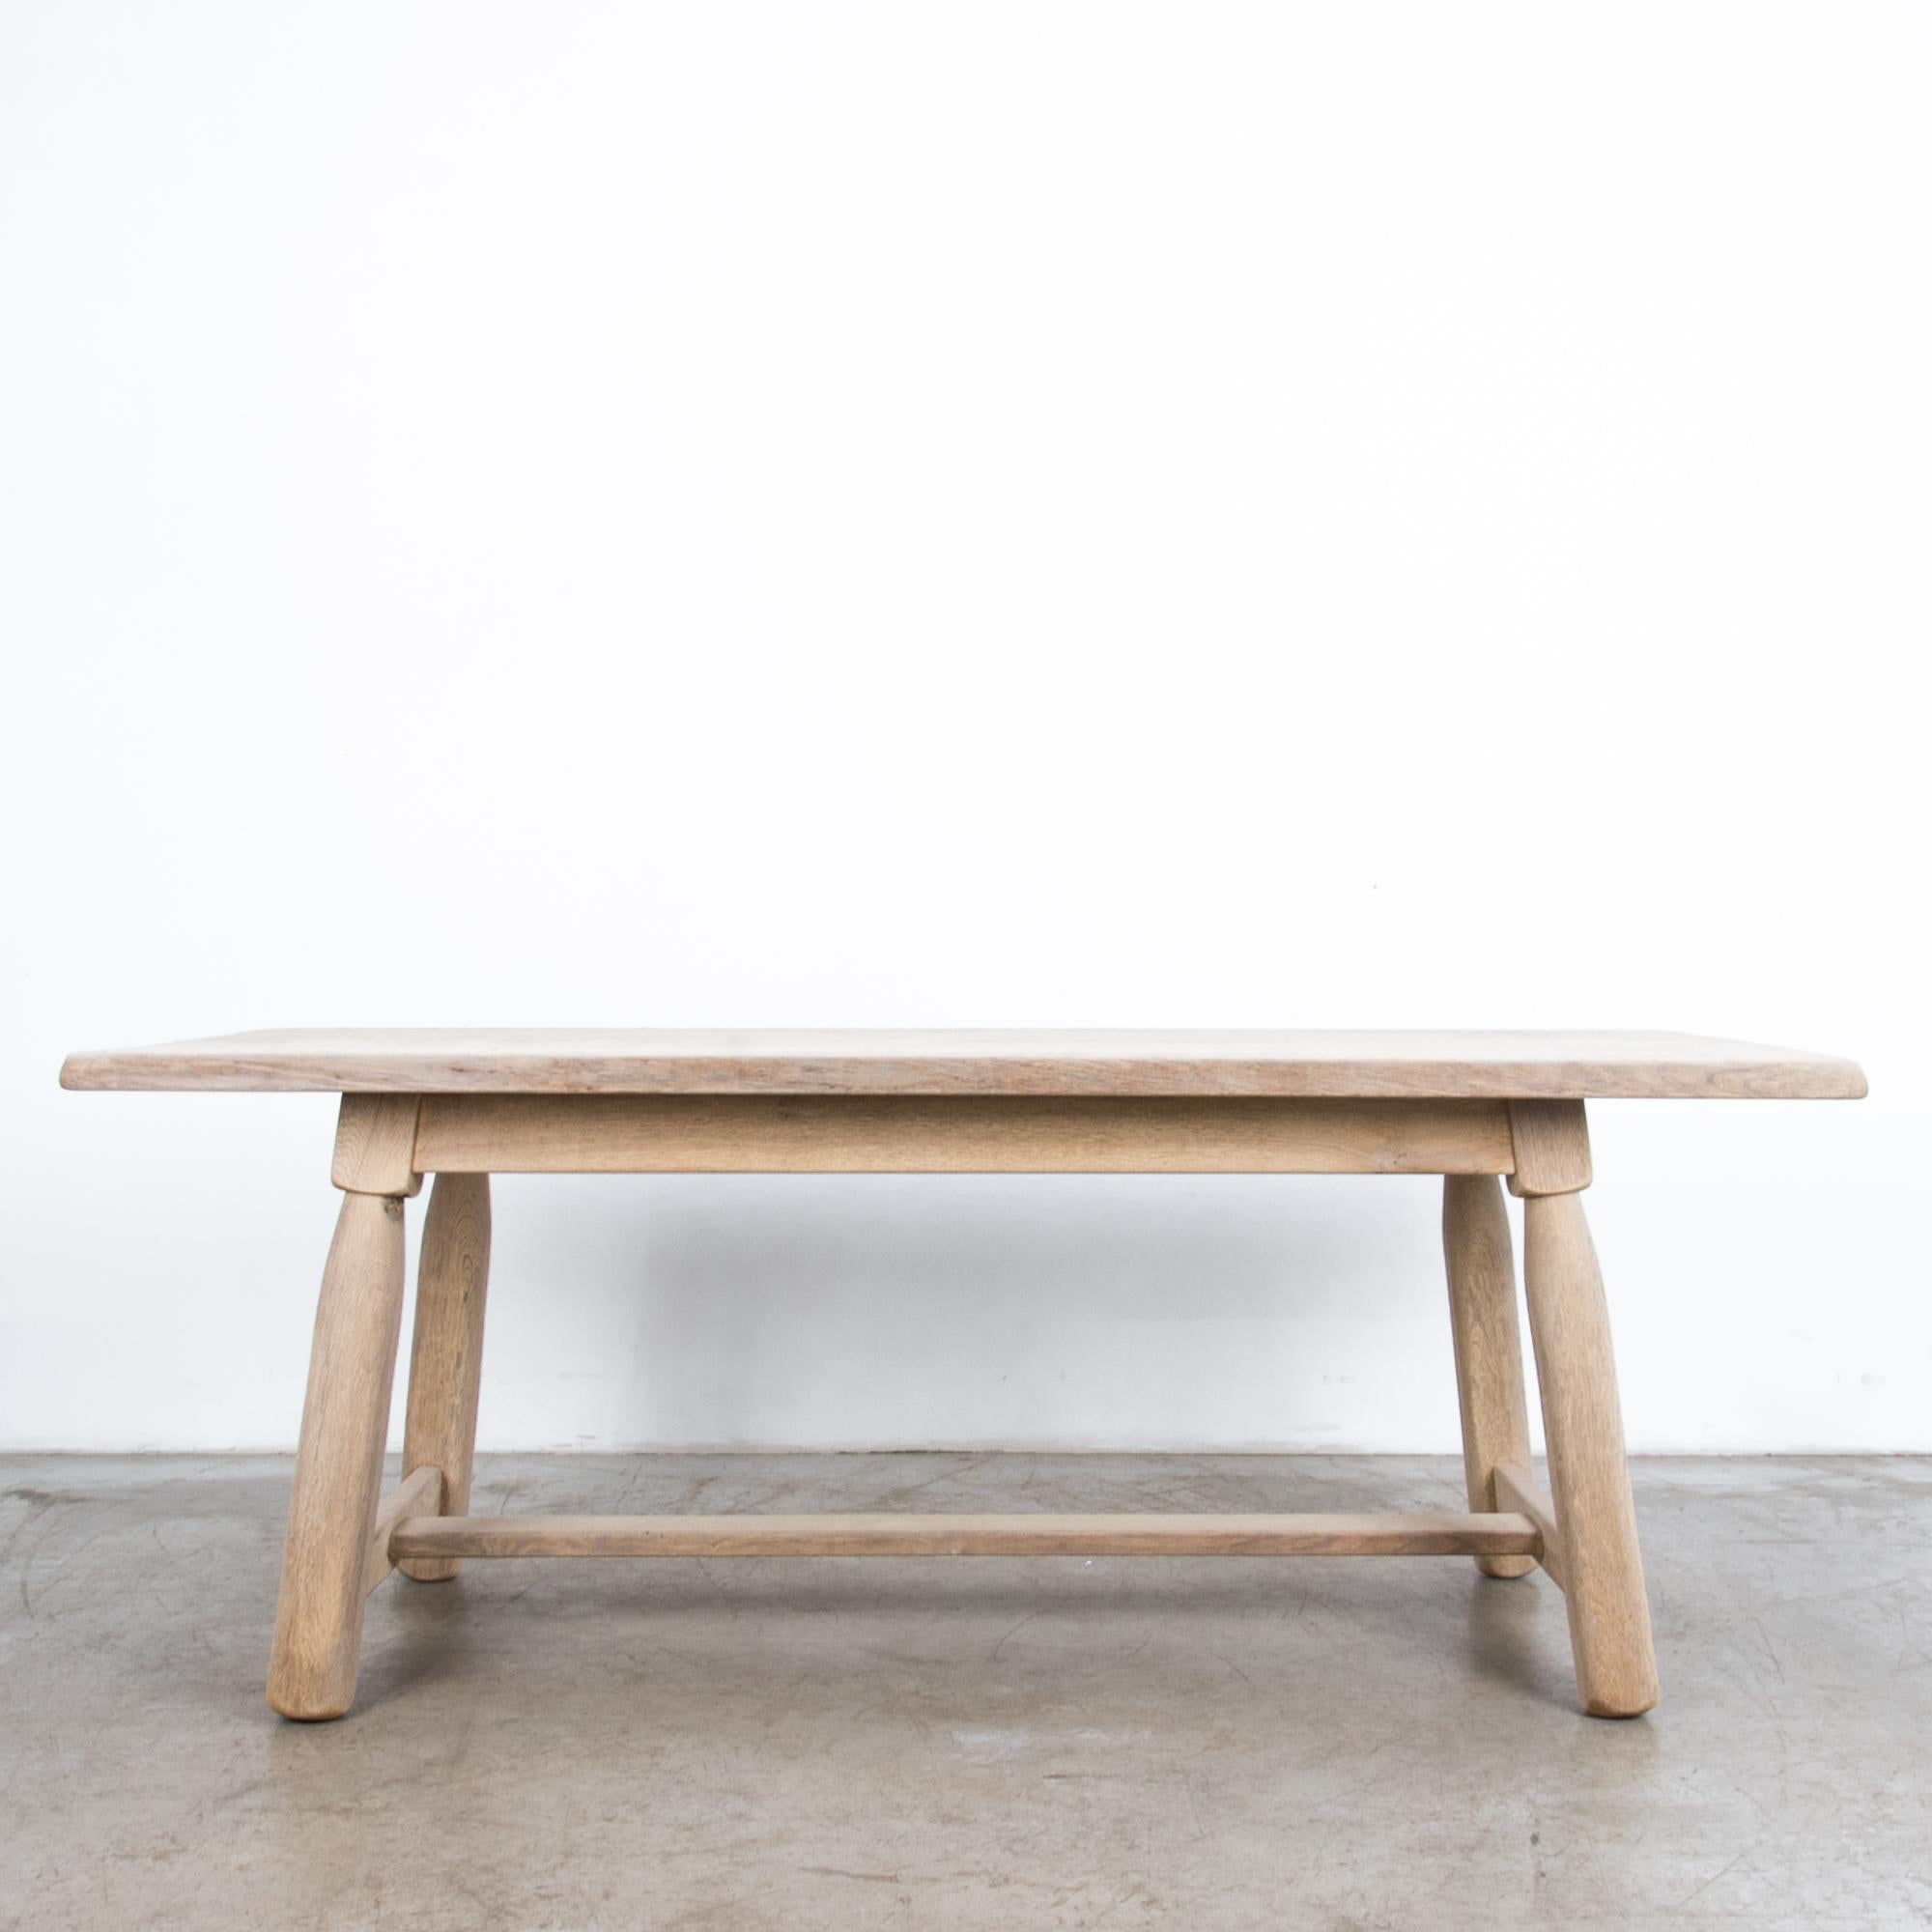 Rustic and simple Belgian style farmhouse table from the 1950s in bleached oak, features distinct rounded legs and trestle brace. Simple wooden forms recall the countryside ideal, following the lineage of European craftsmanship, with modernist